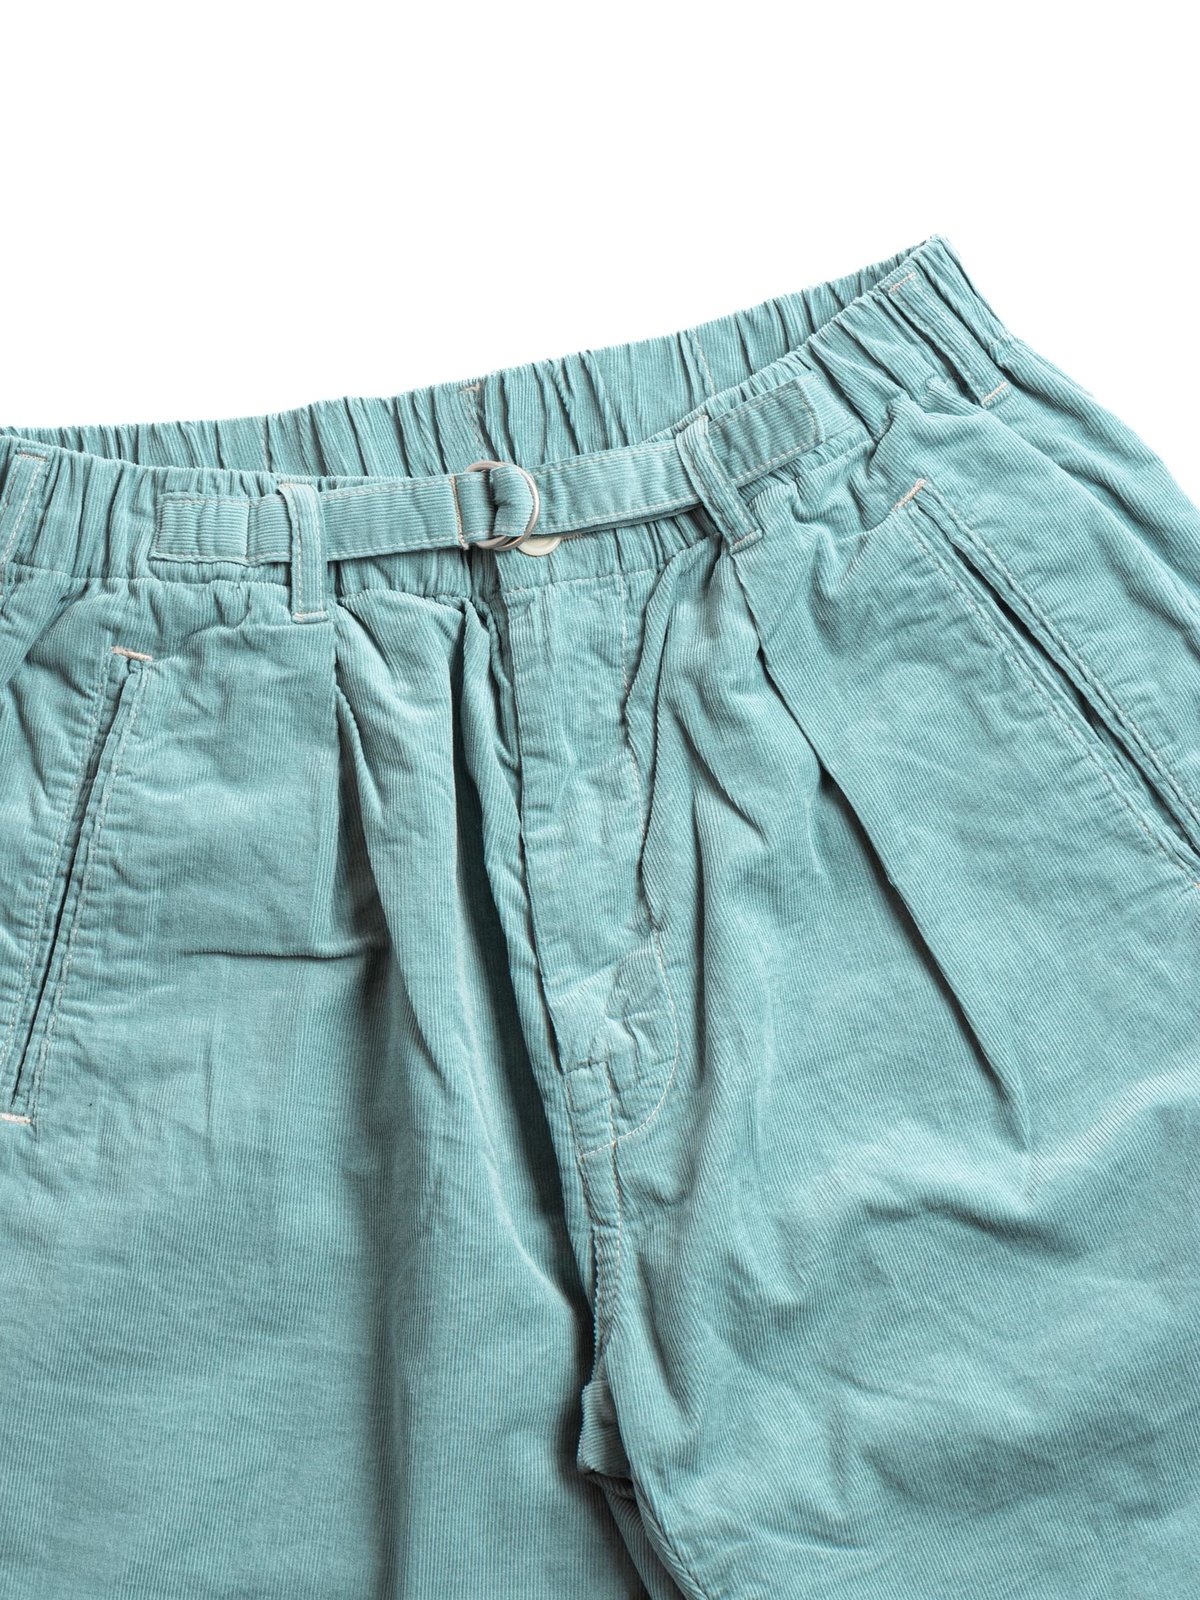 E–Z LAX 4 SHORTS SUMMER CORDS MUSCAT GREEN - Image 2